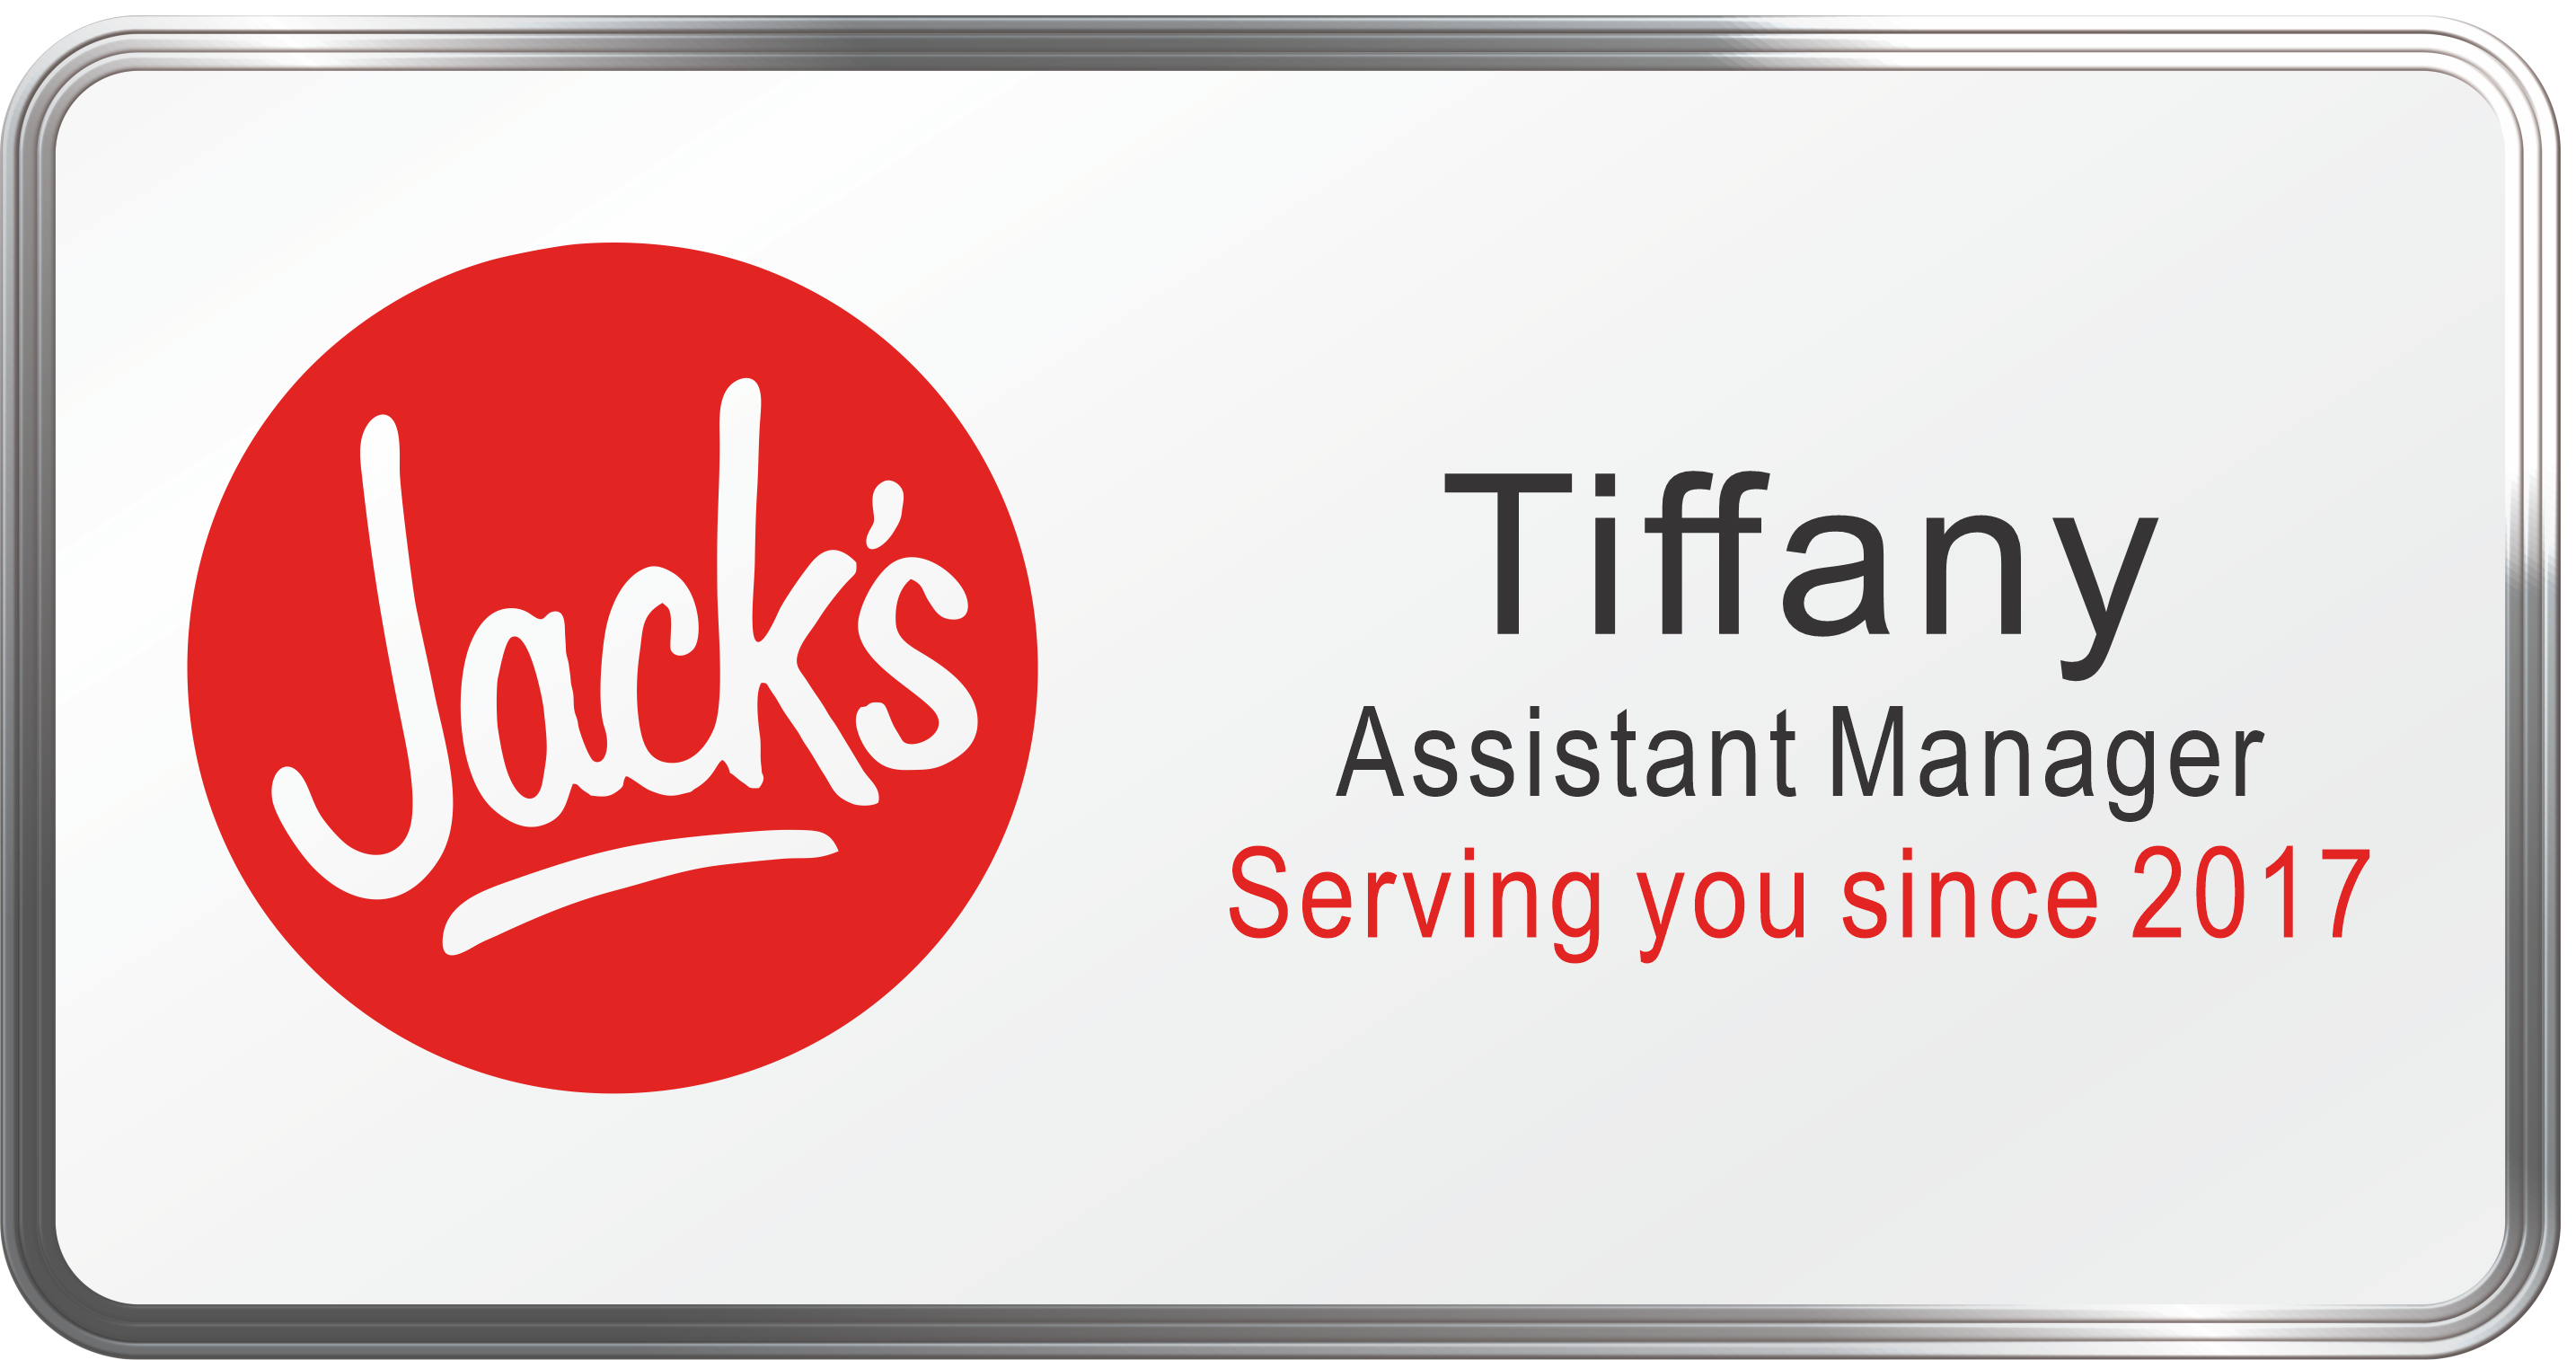 Employee name badge featuring logo for Jack's Restaurant